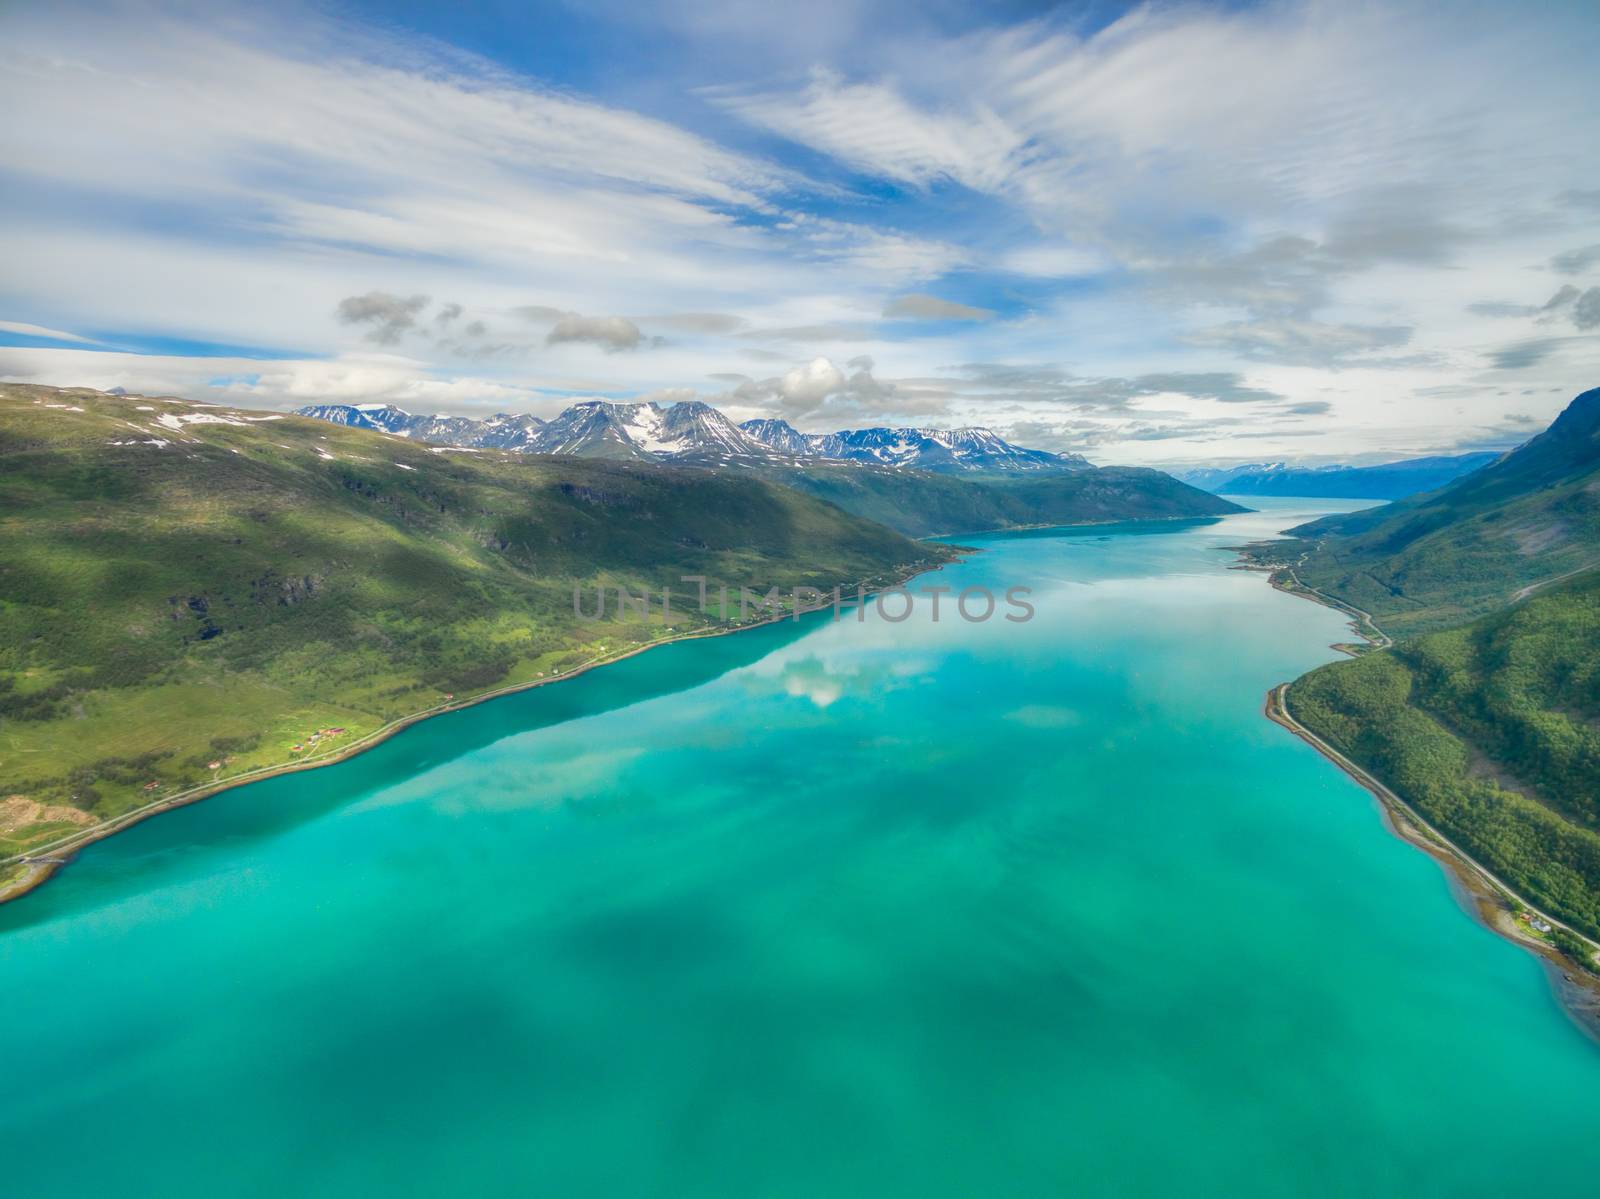 Turquoise waters of norwegian fjord by Harvepino